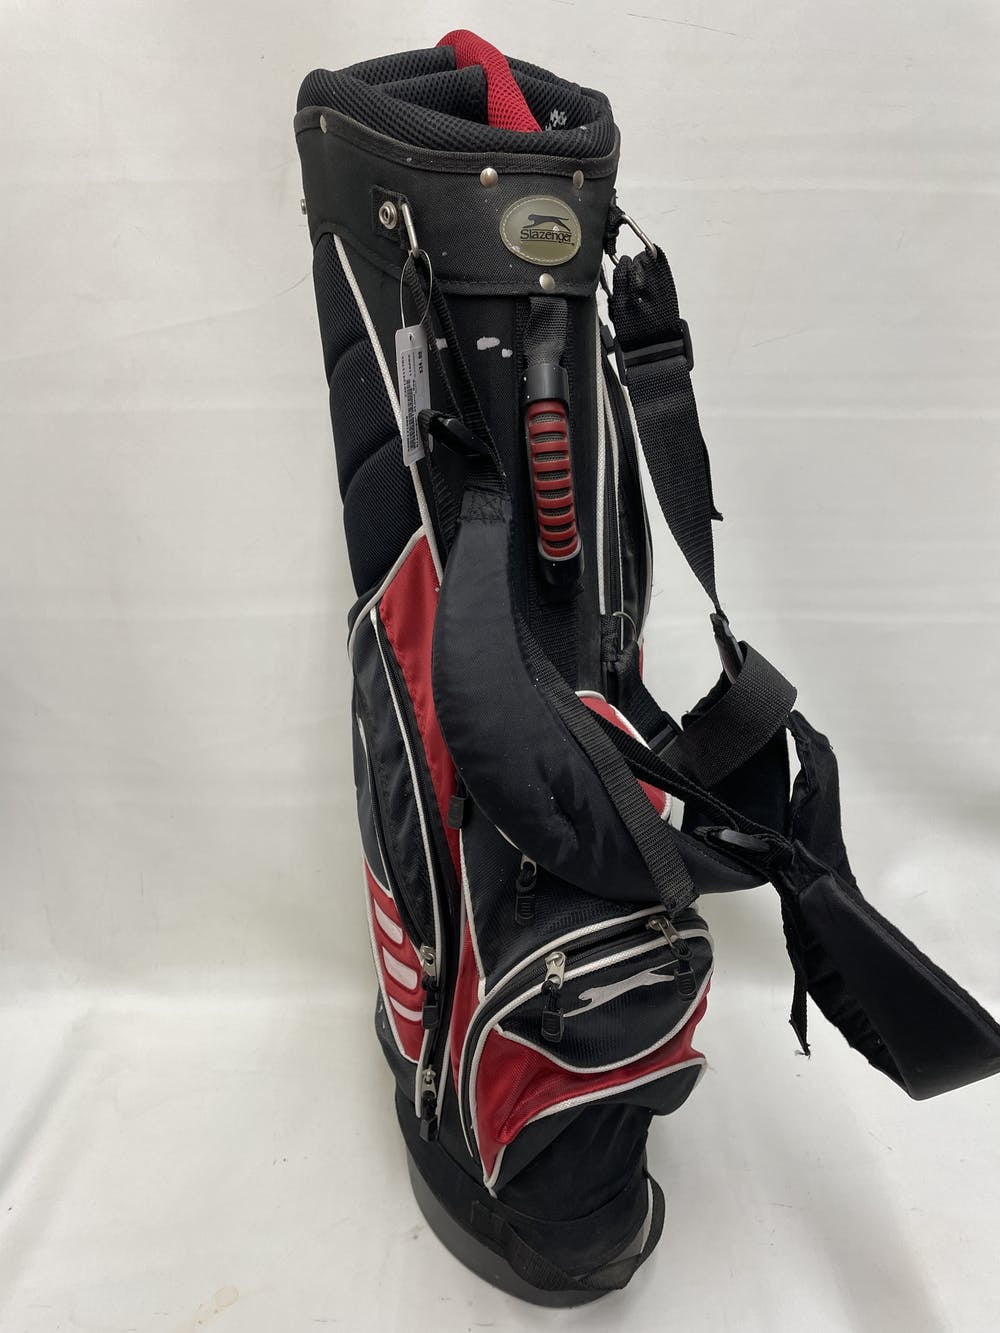 Used *Other Brand Golf Stand Bags Walmart.com